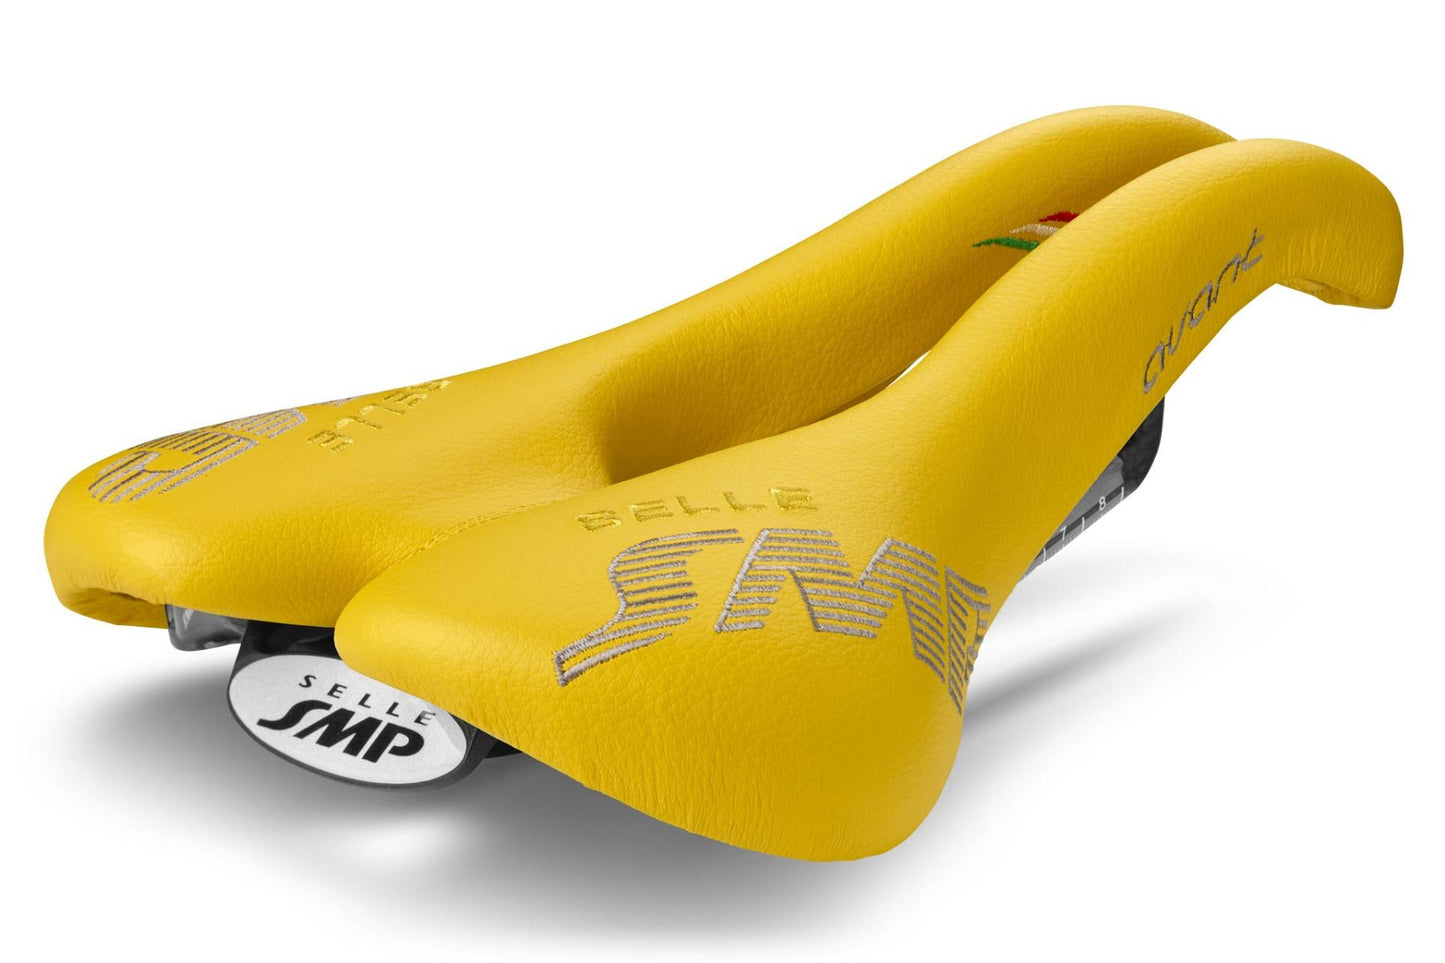 Selle SMP Avant Saddle with Carbon Rails (Yellow)